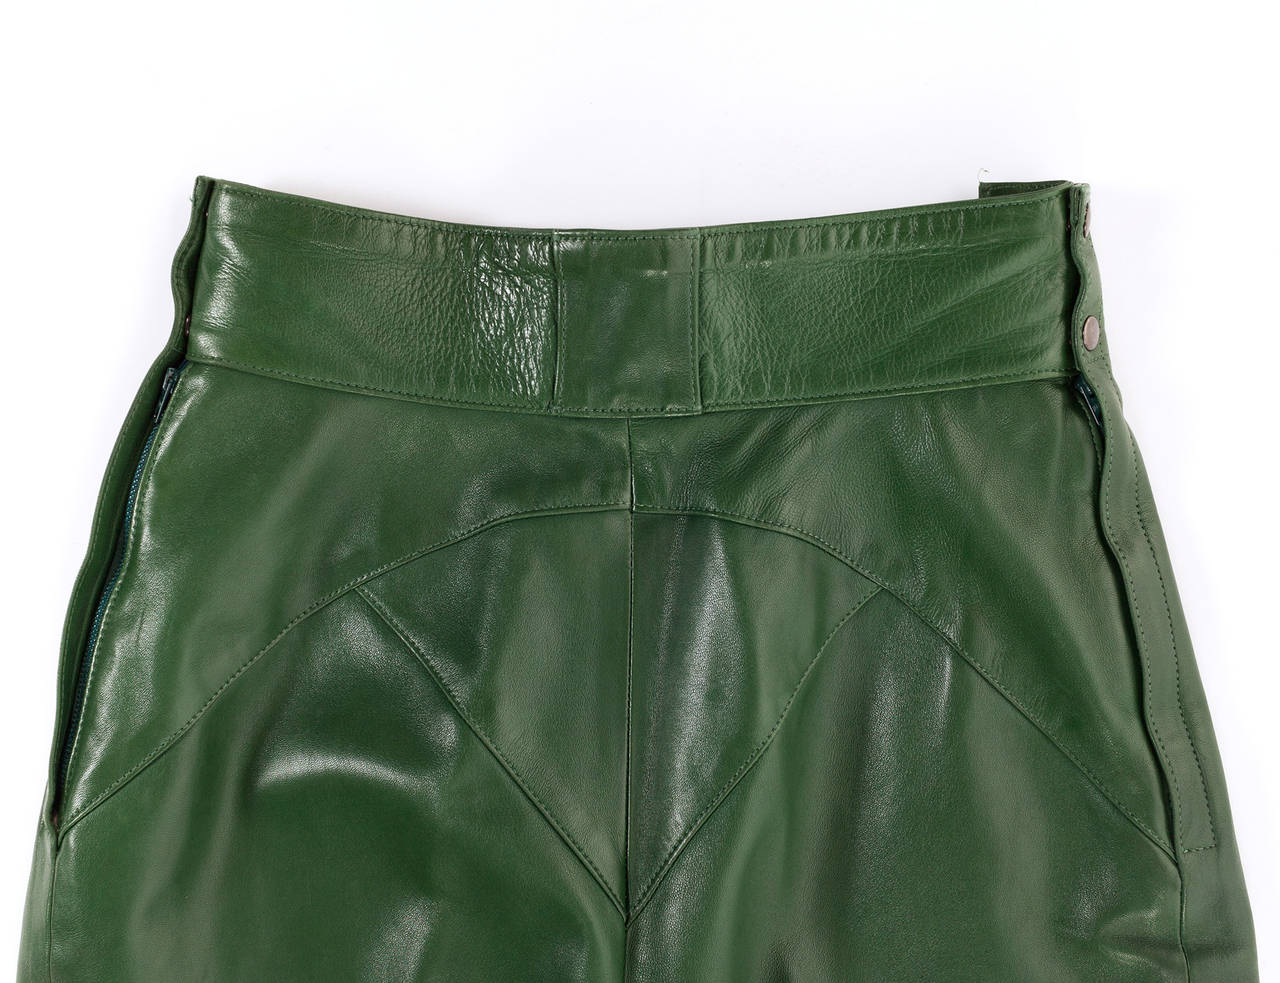 Gray Azzendine Alaia green leather fitted trousers.